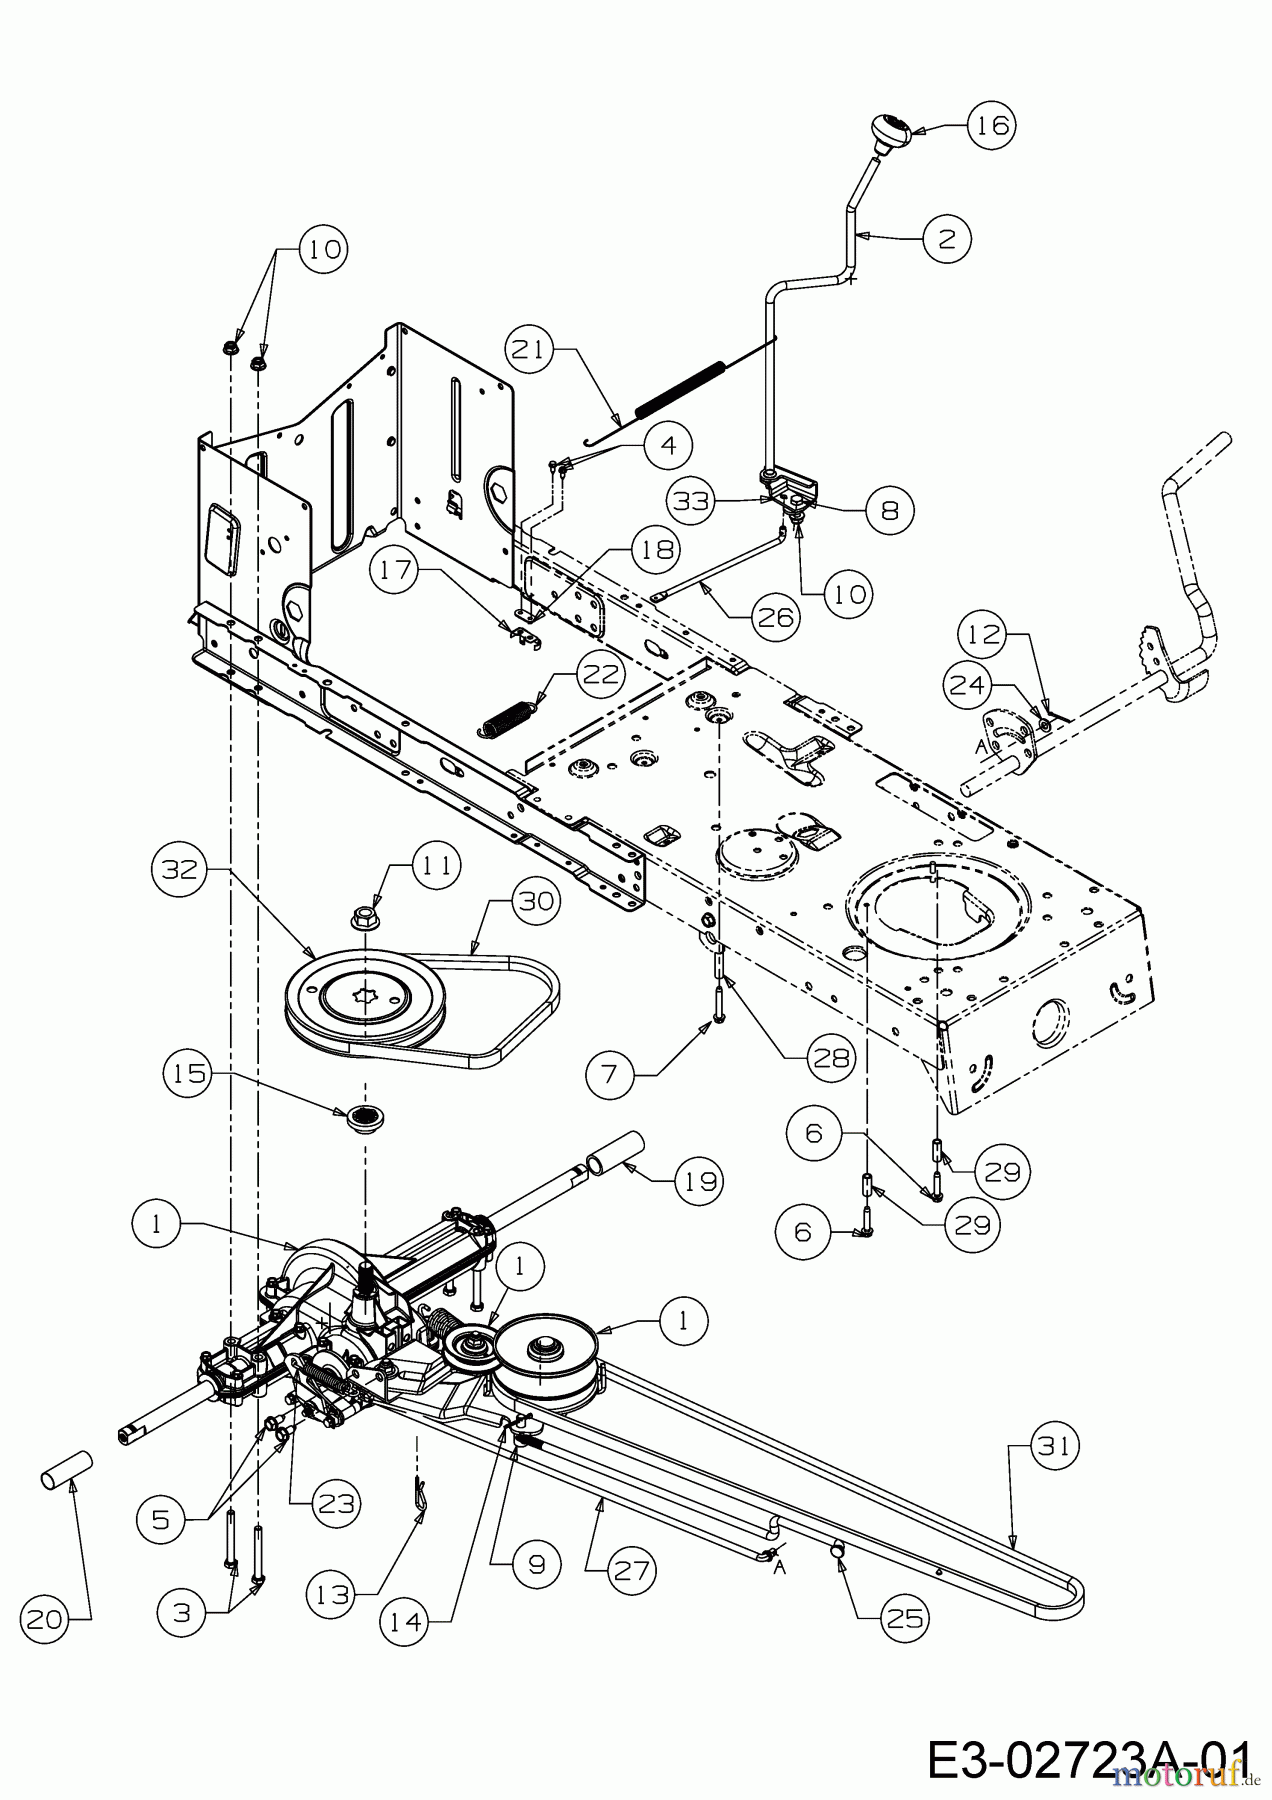  Black-Line Lawn tractors RS 22/107 13A4761G683  (2006) Drive system